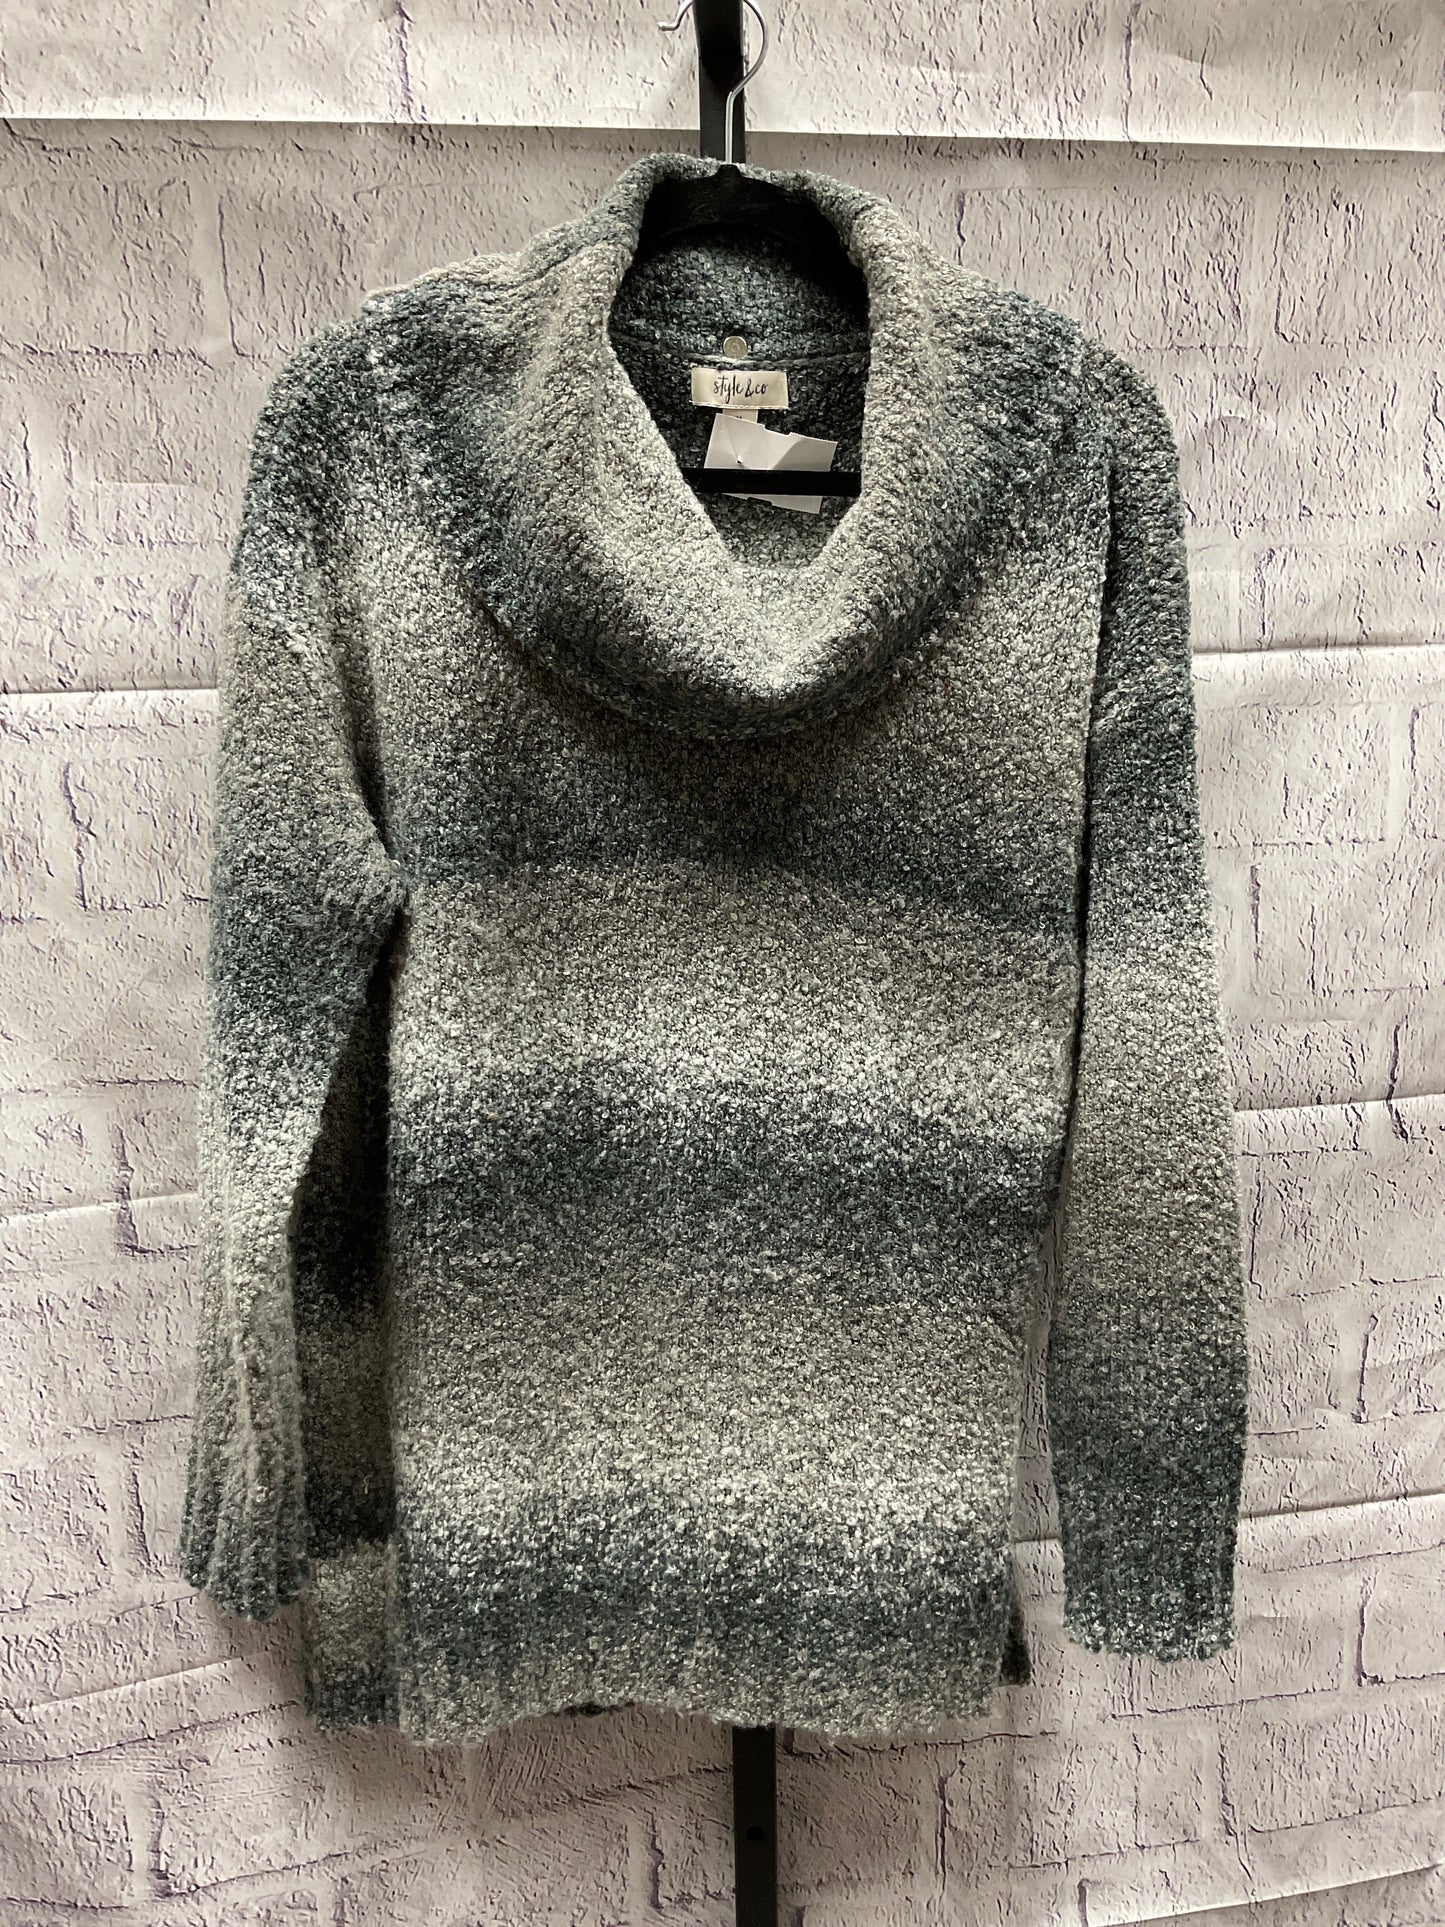 Sweater By Style And Company  Size: M